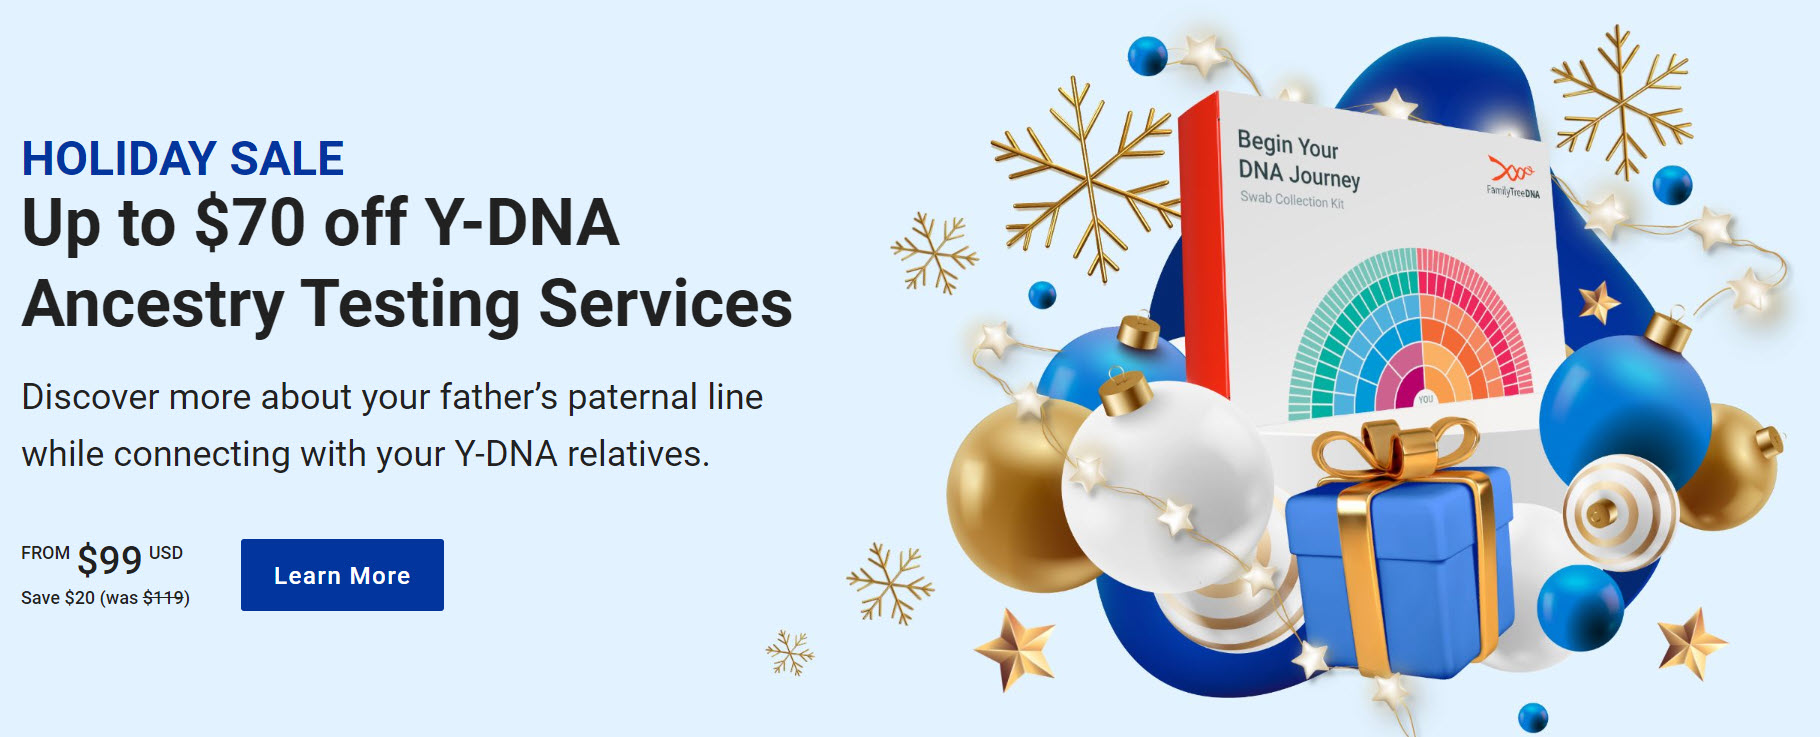 There are even more savings when you purchase these Y-DNA test kits at FamilyTreeDNA! VIEW DETAILS